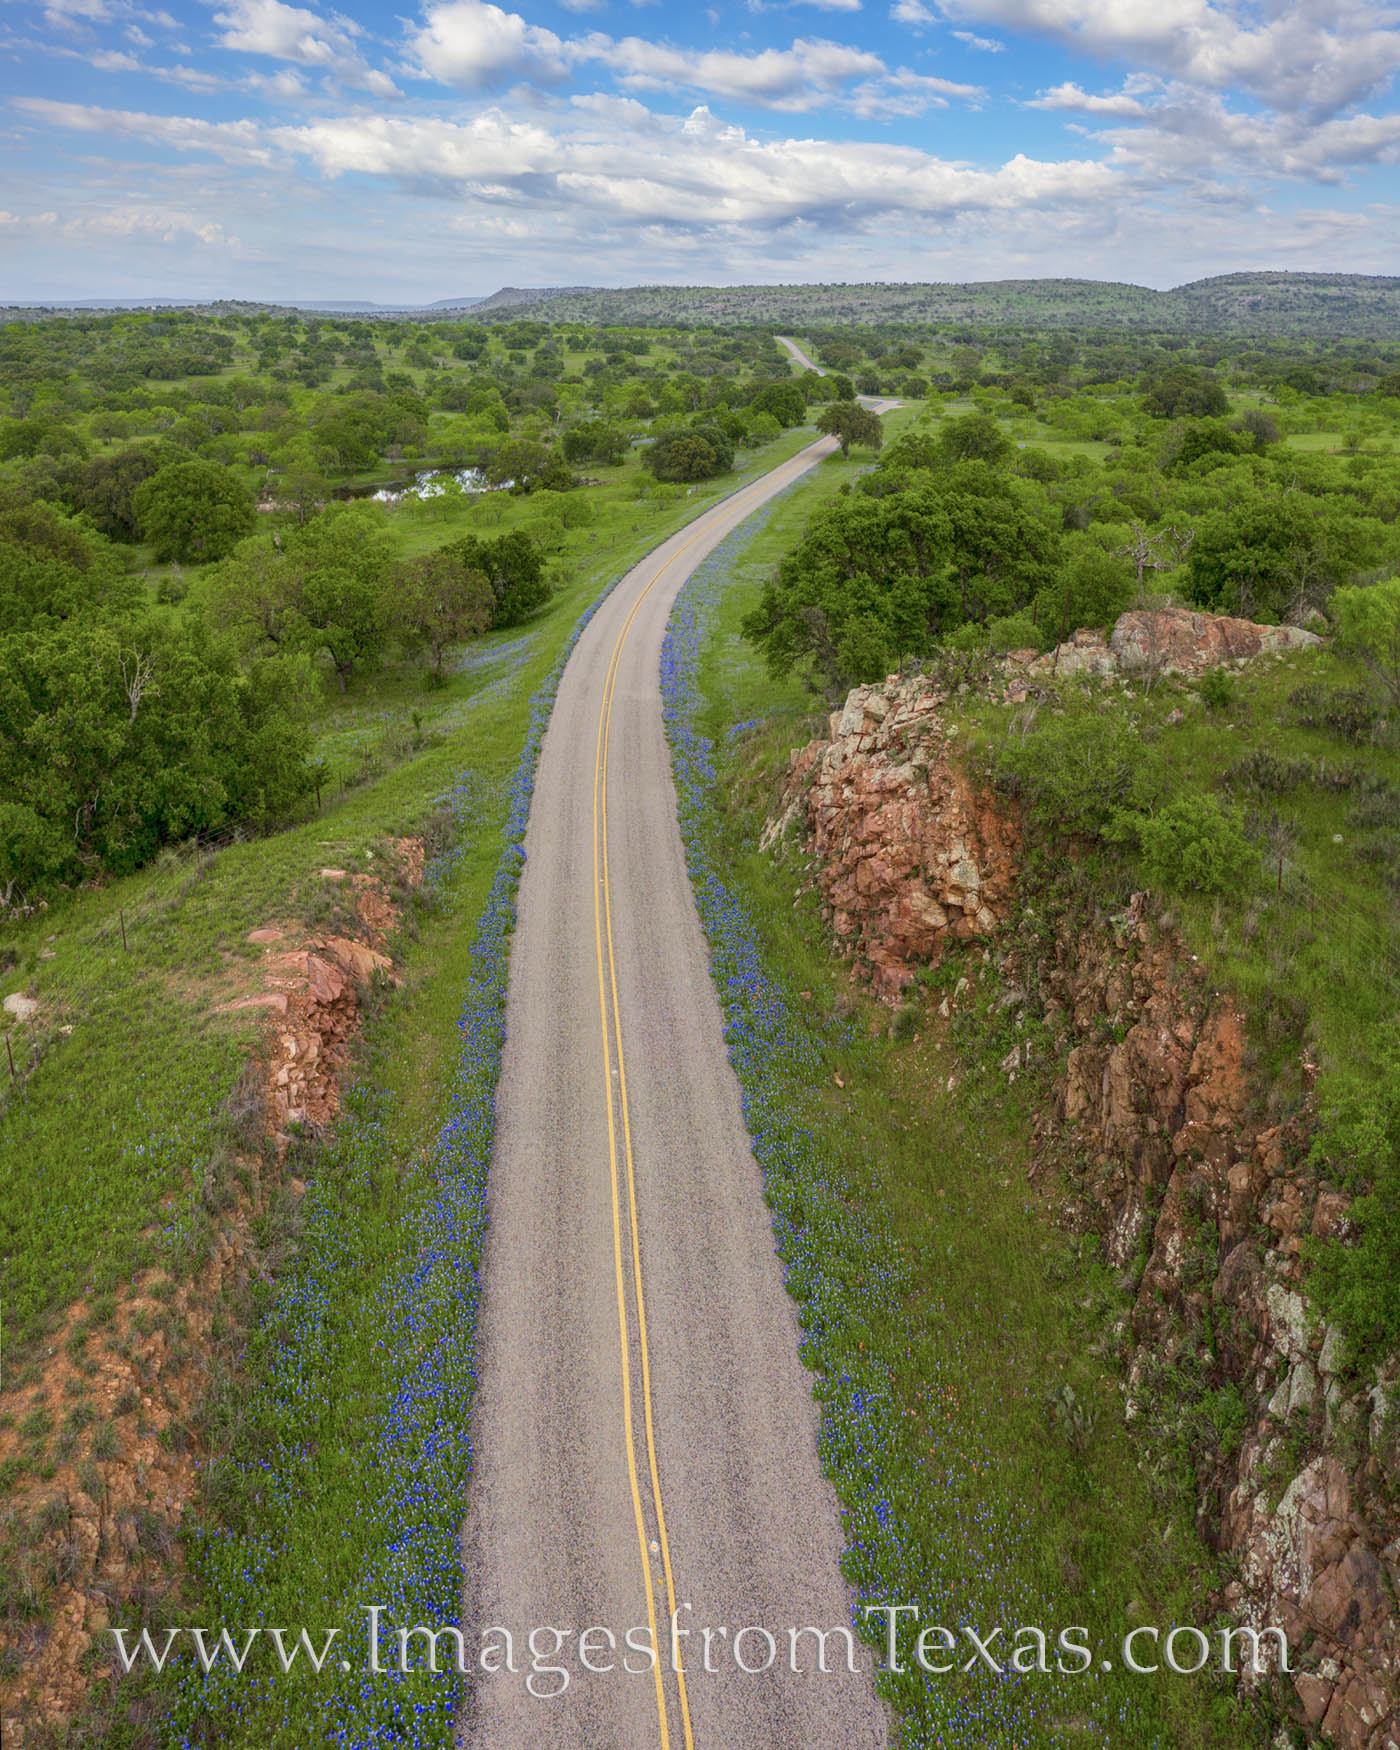 This beautiful aerial view of bluebonnets that line the road was taken with a drone on a perfect spring afternoon in the Texas...